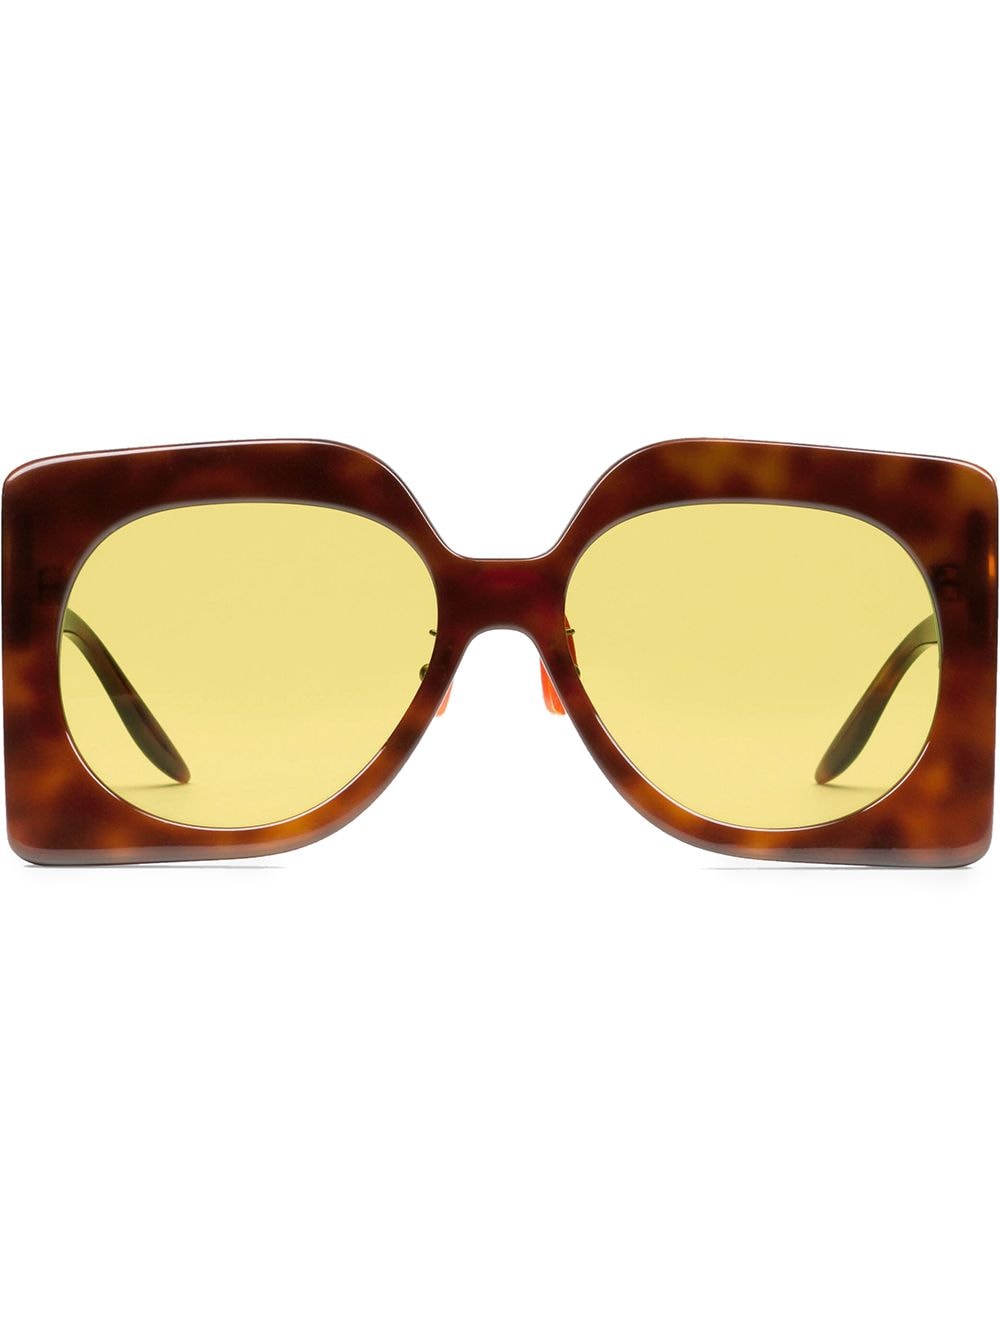 Brown acetate/rubber oversized-frame tinted sunglasses